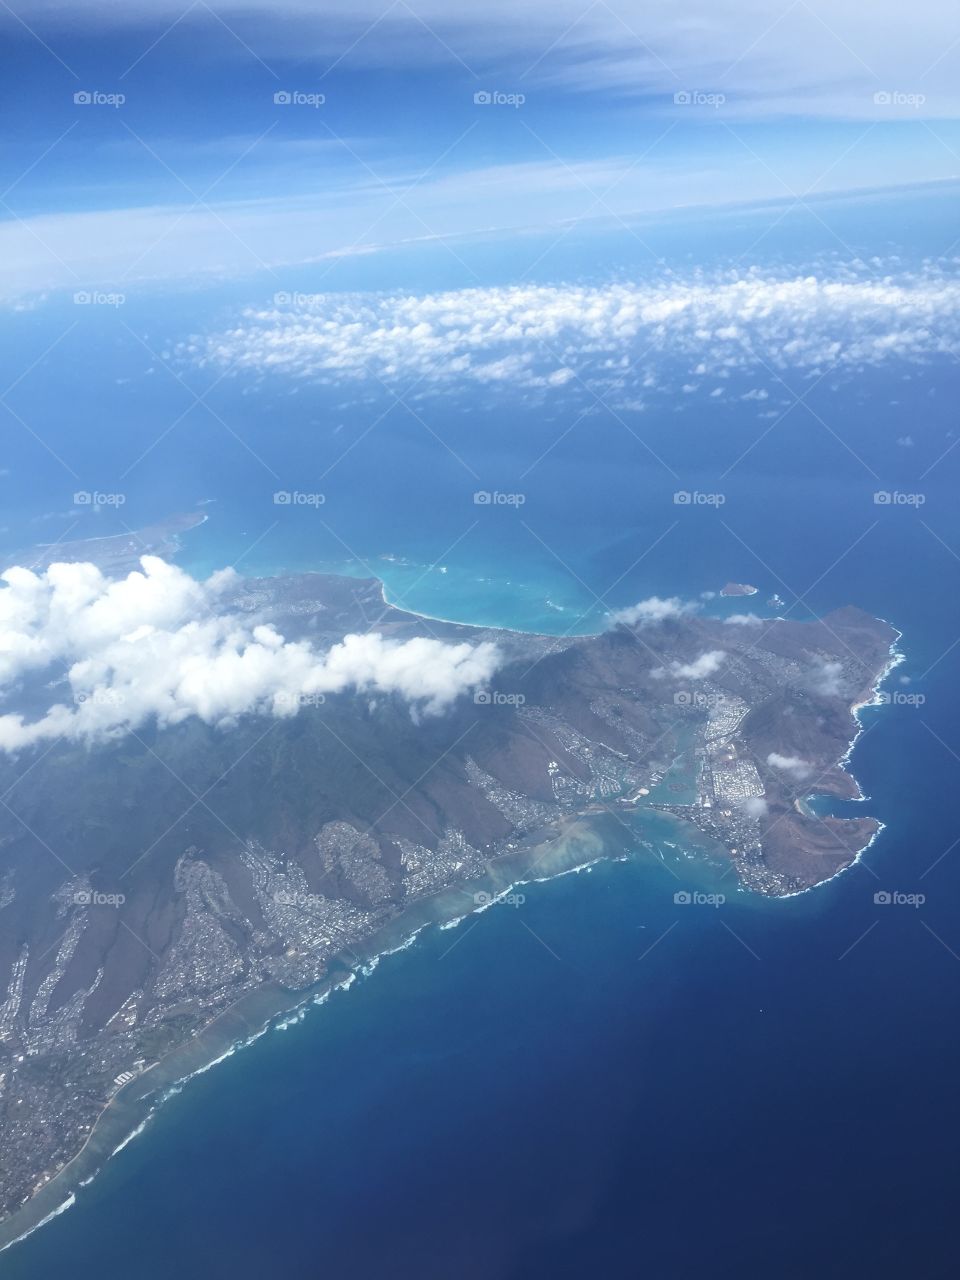 Maui from the sky